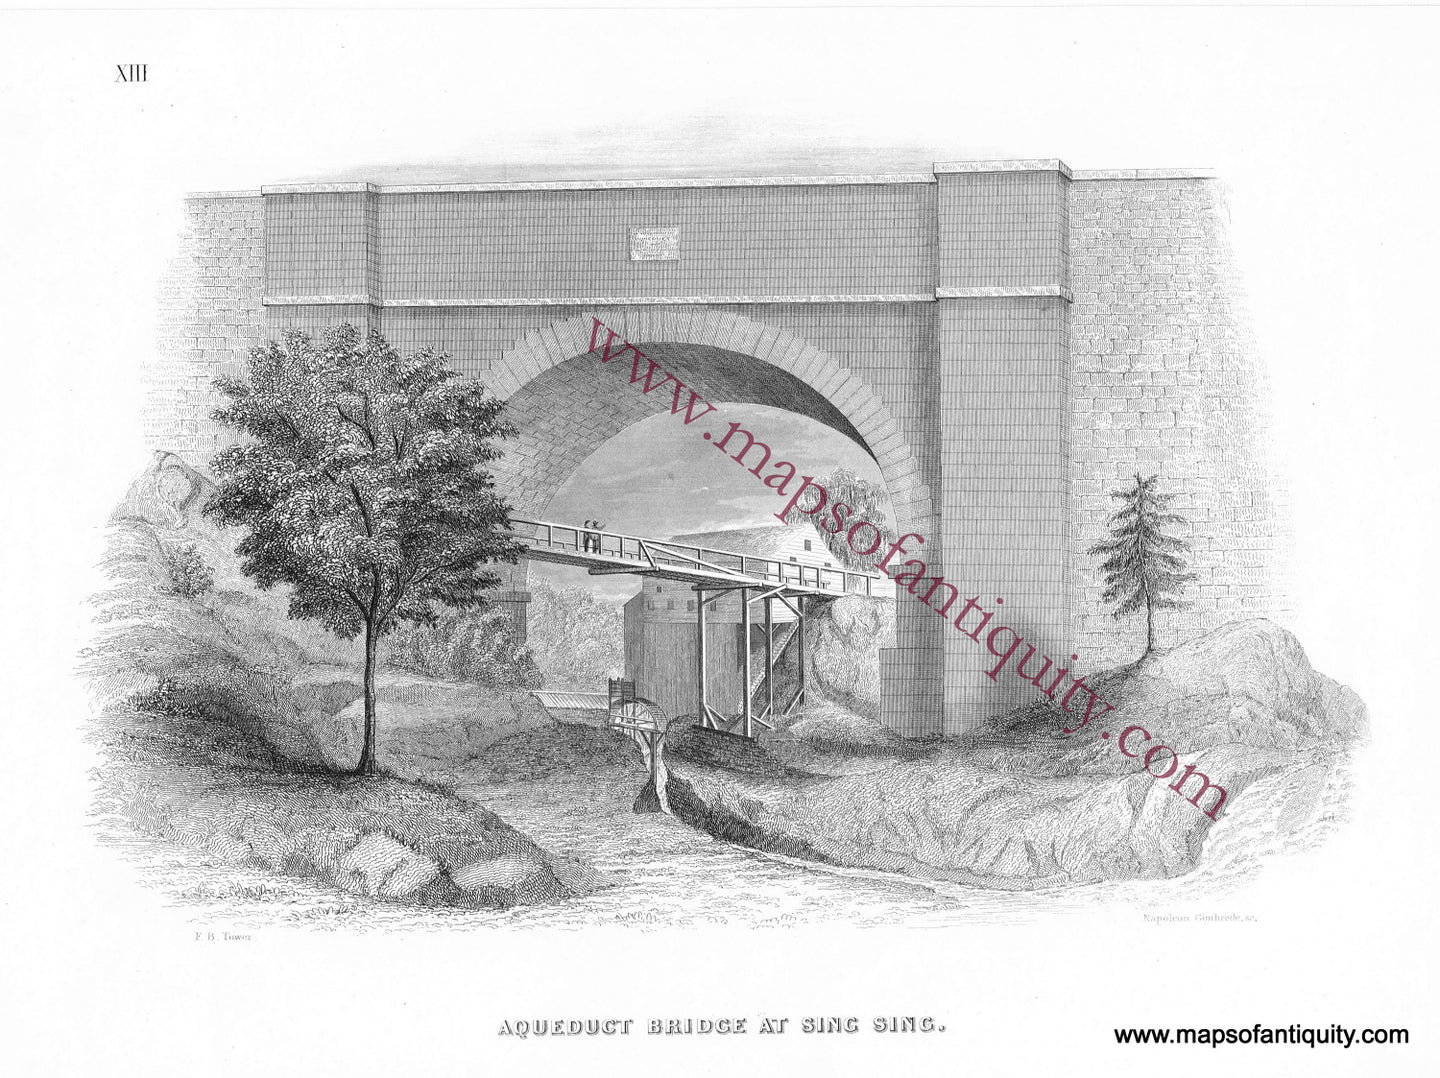 Antique-Uncolored-Print-Aqueduct-Bridge-at-Sing-Sing-United-States-New-York-1843-Tower/Wiley-&-Putnam-Maps-Of-Antiquity